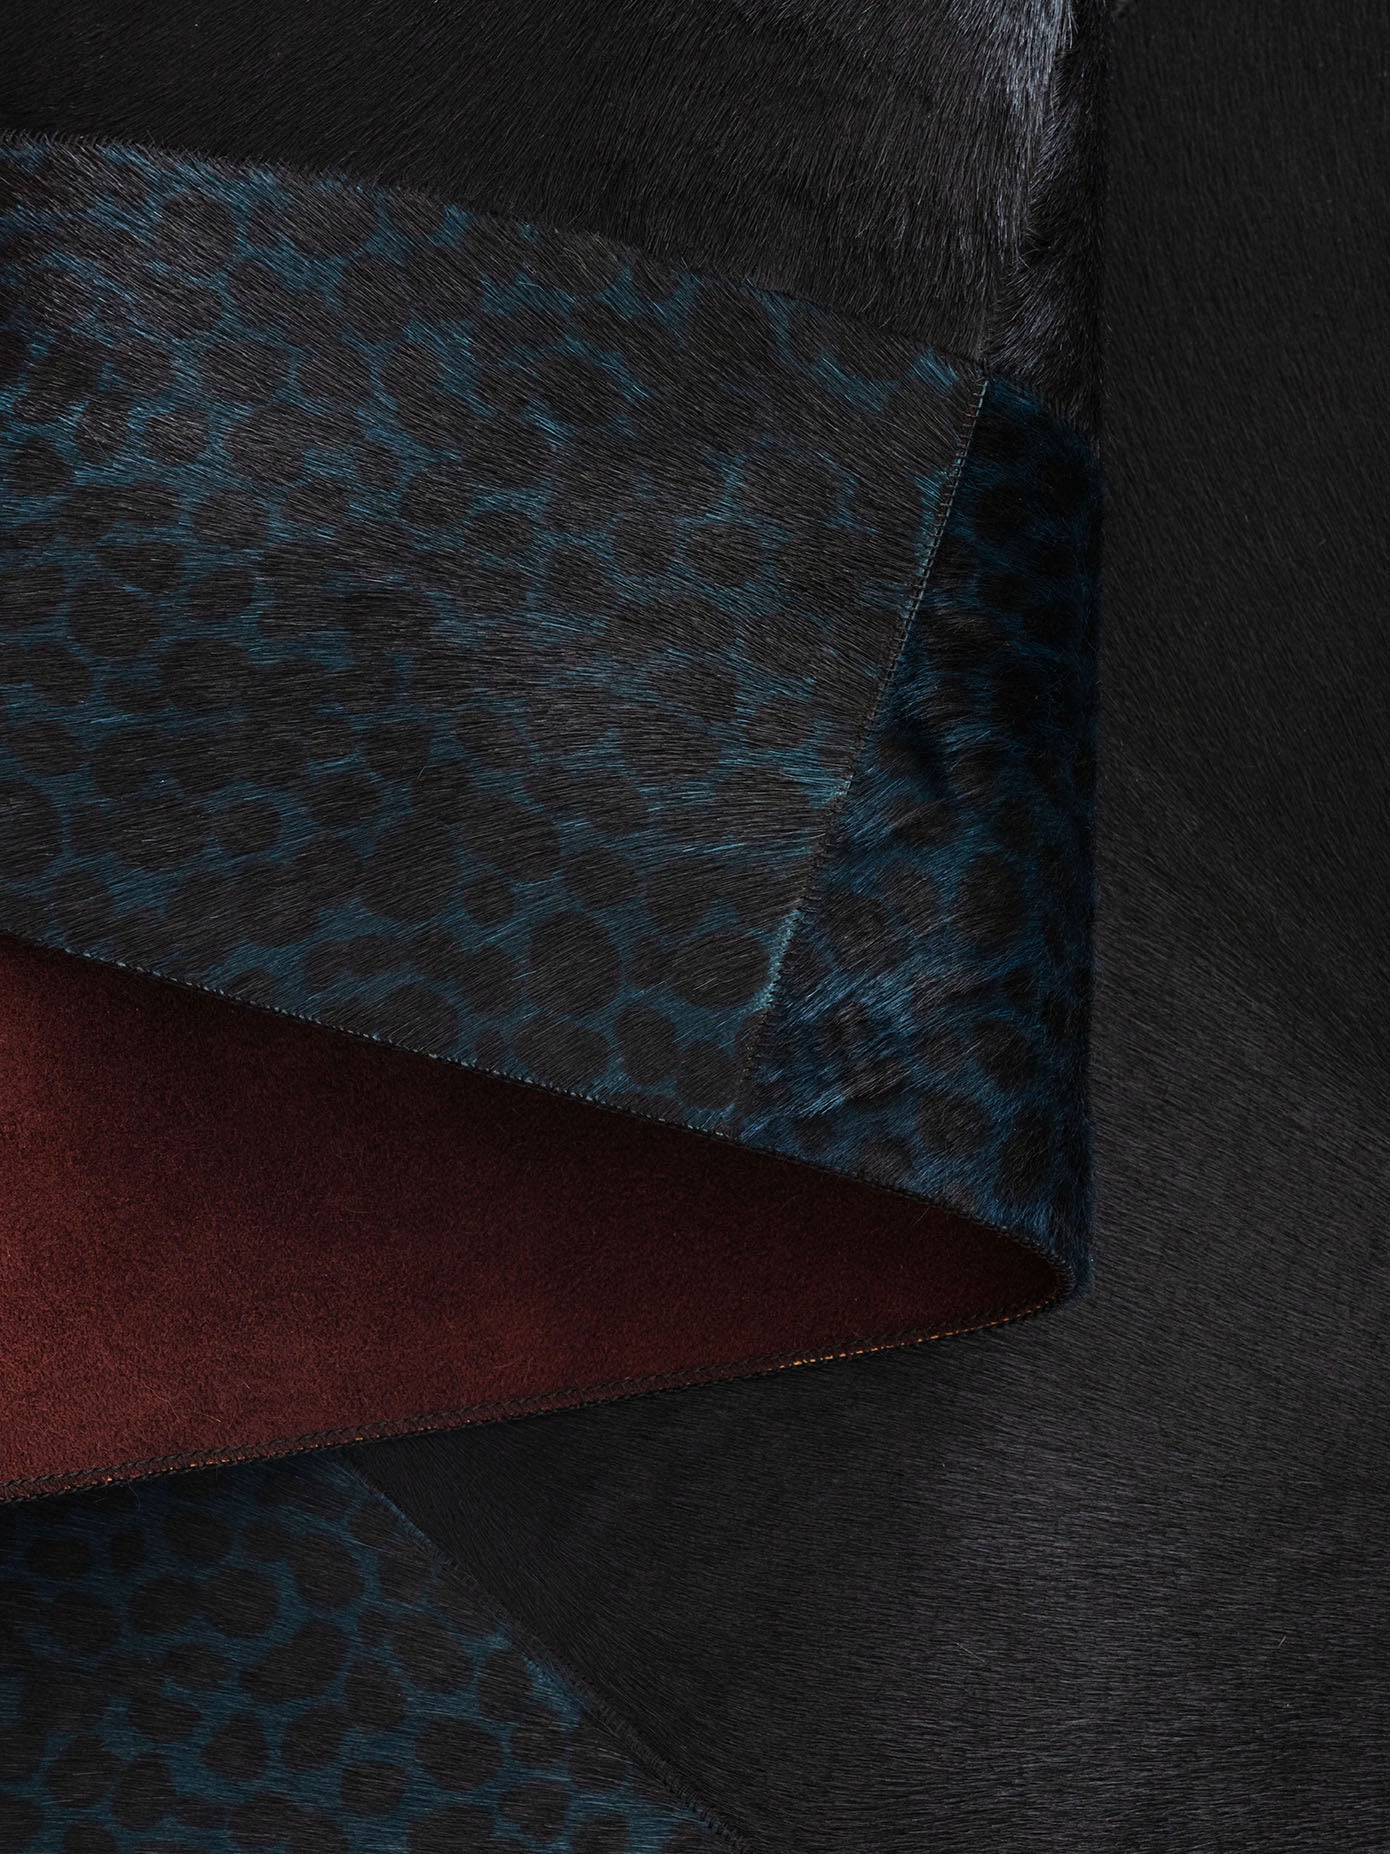 Turquoise Leopard Printed Black Leather Carpet